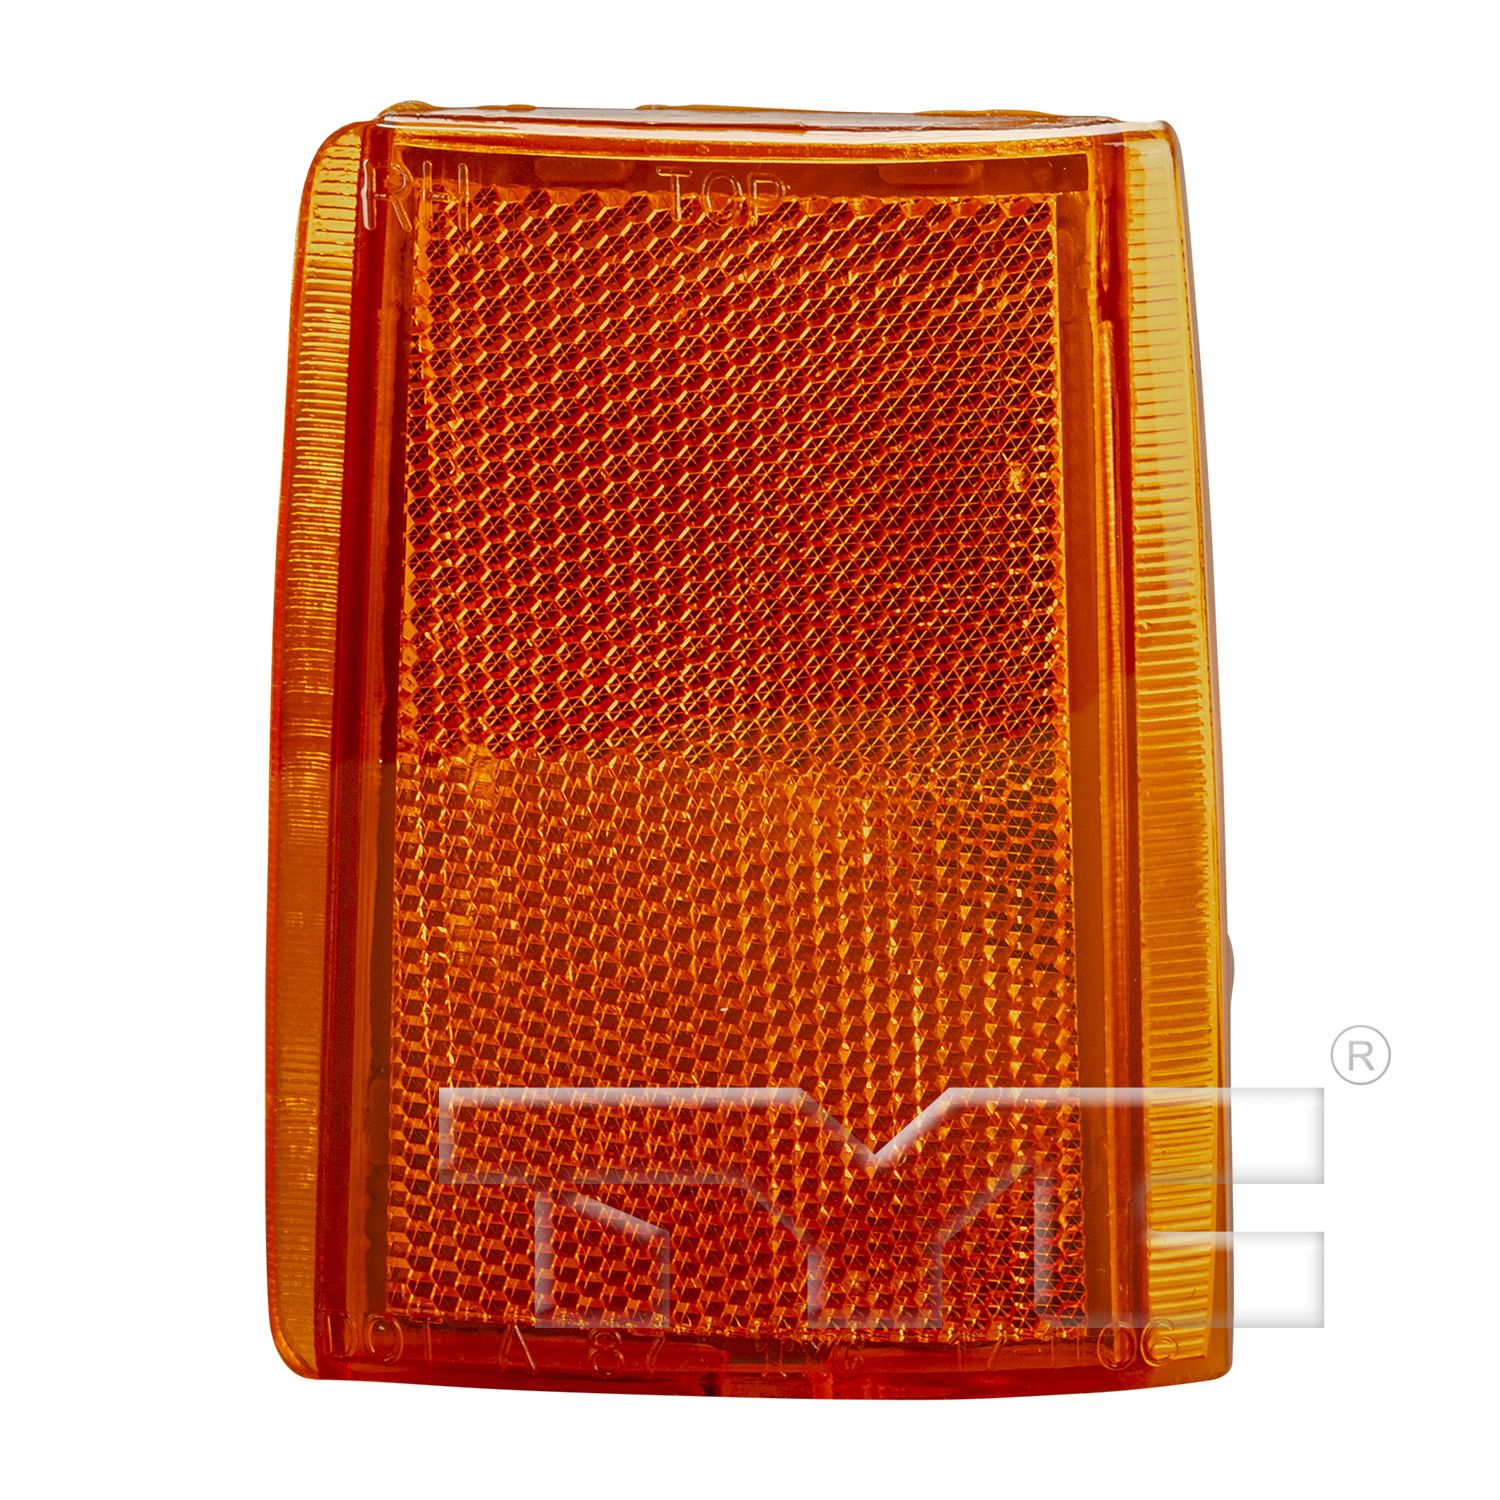 Aftermarket LAMPS for CHEVROLET - C2500 SUBURBAN, C2500 SUBURBAN,92-93,RT Front side reflector